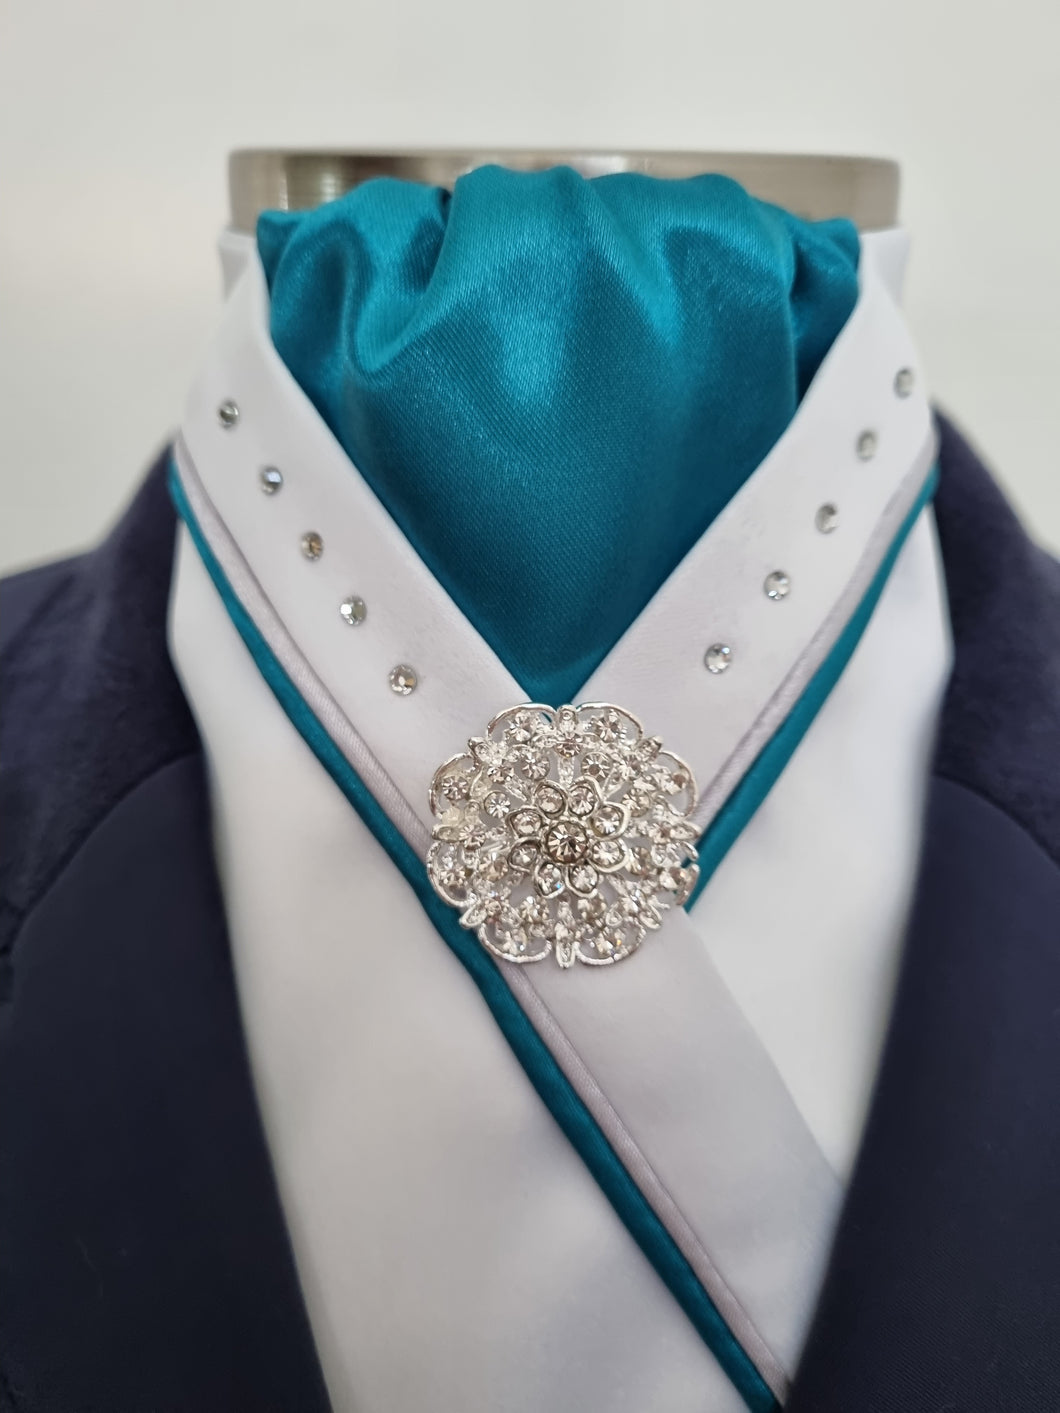 ERA SOPHIE STOCK TIE - White & Teal satin with teal & silver satin piping, crystals and silver brooch